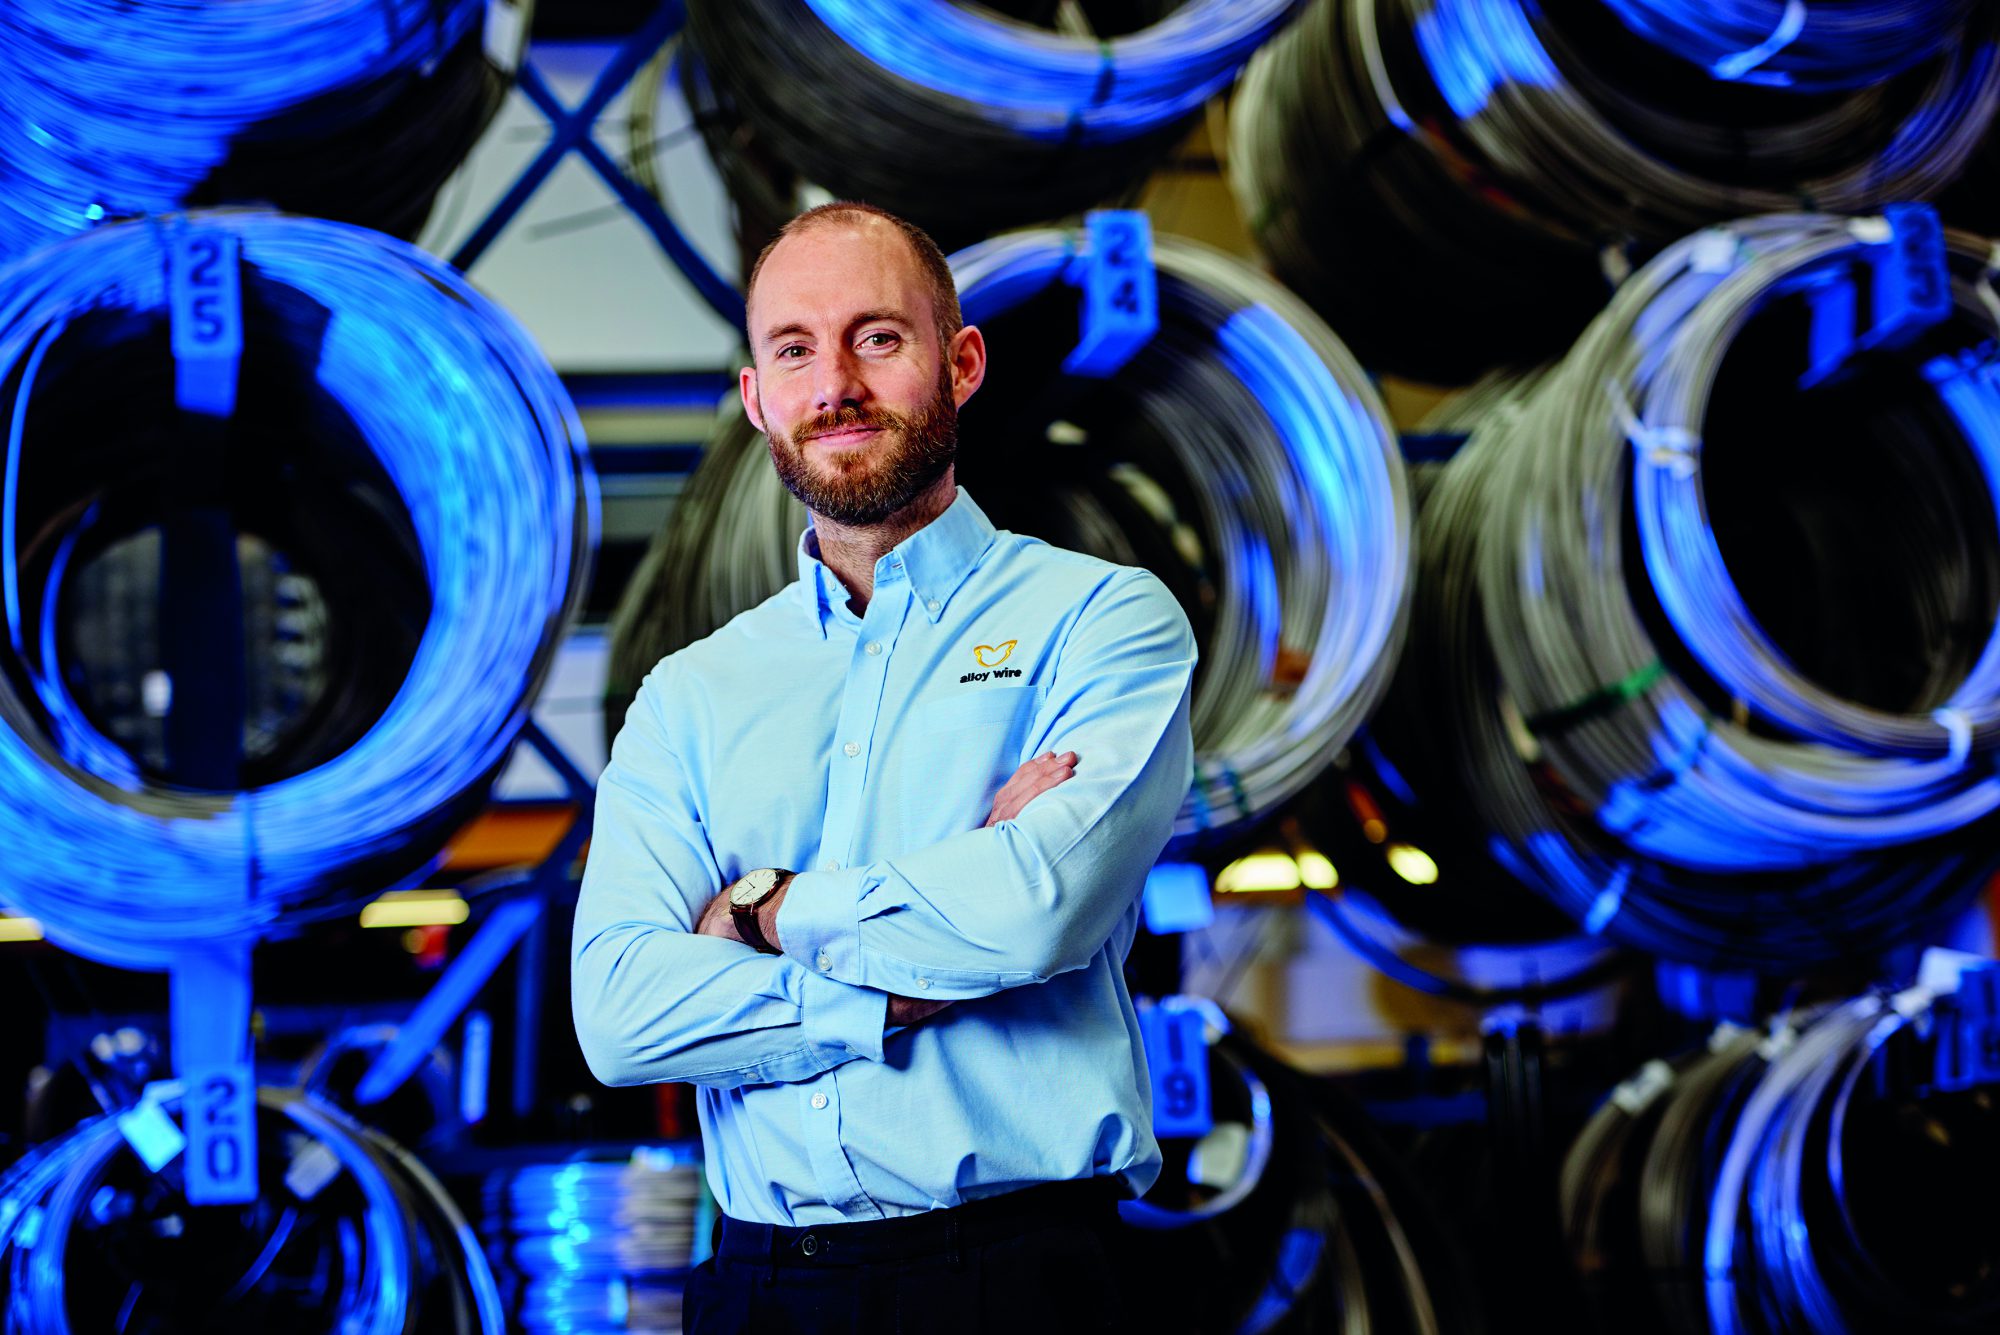 AWI’s new Managing Director sets out ambitious growth plans - Alloy Wire International 1